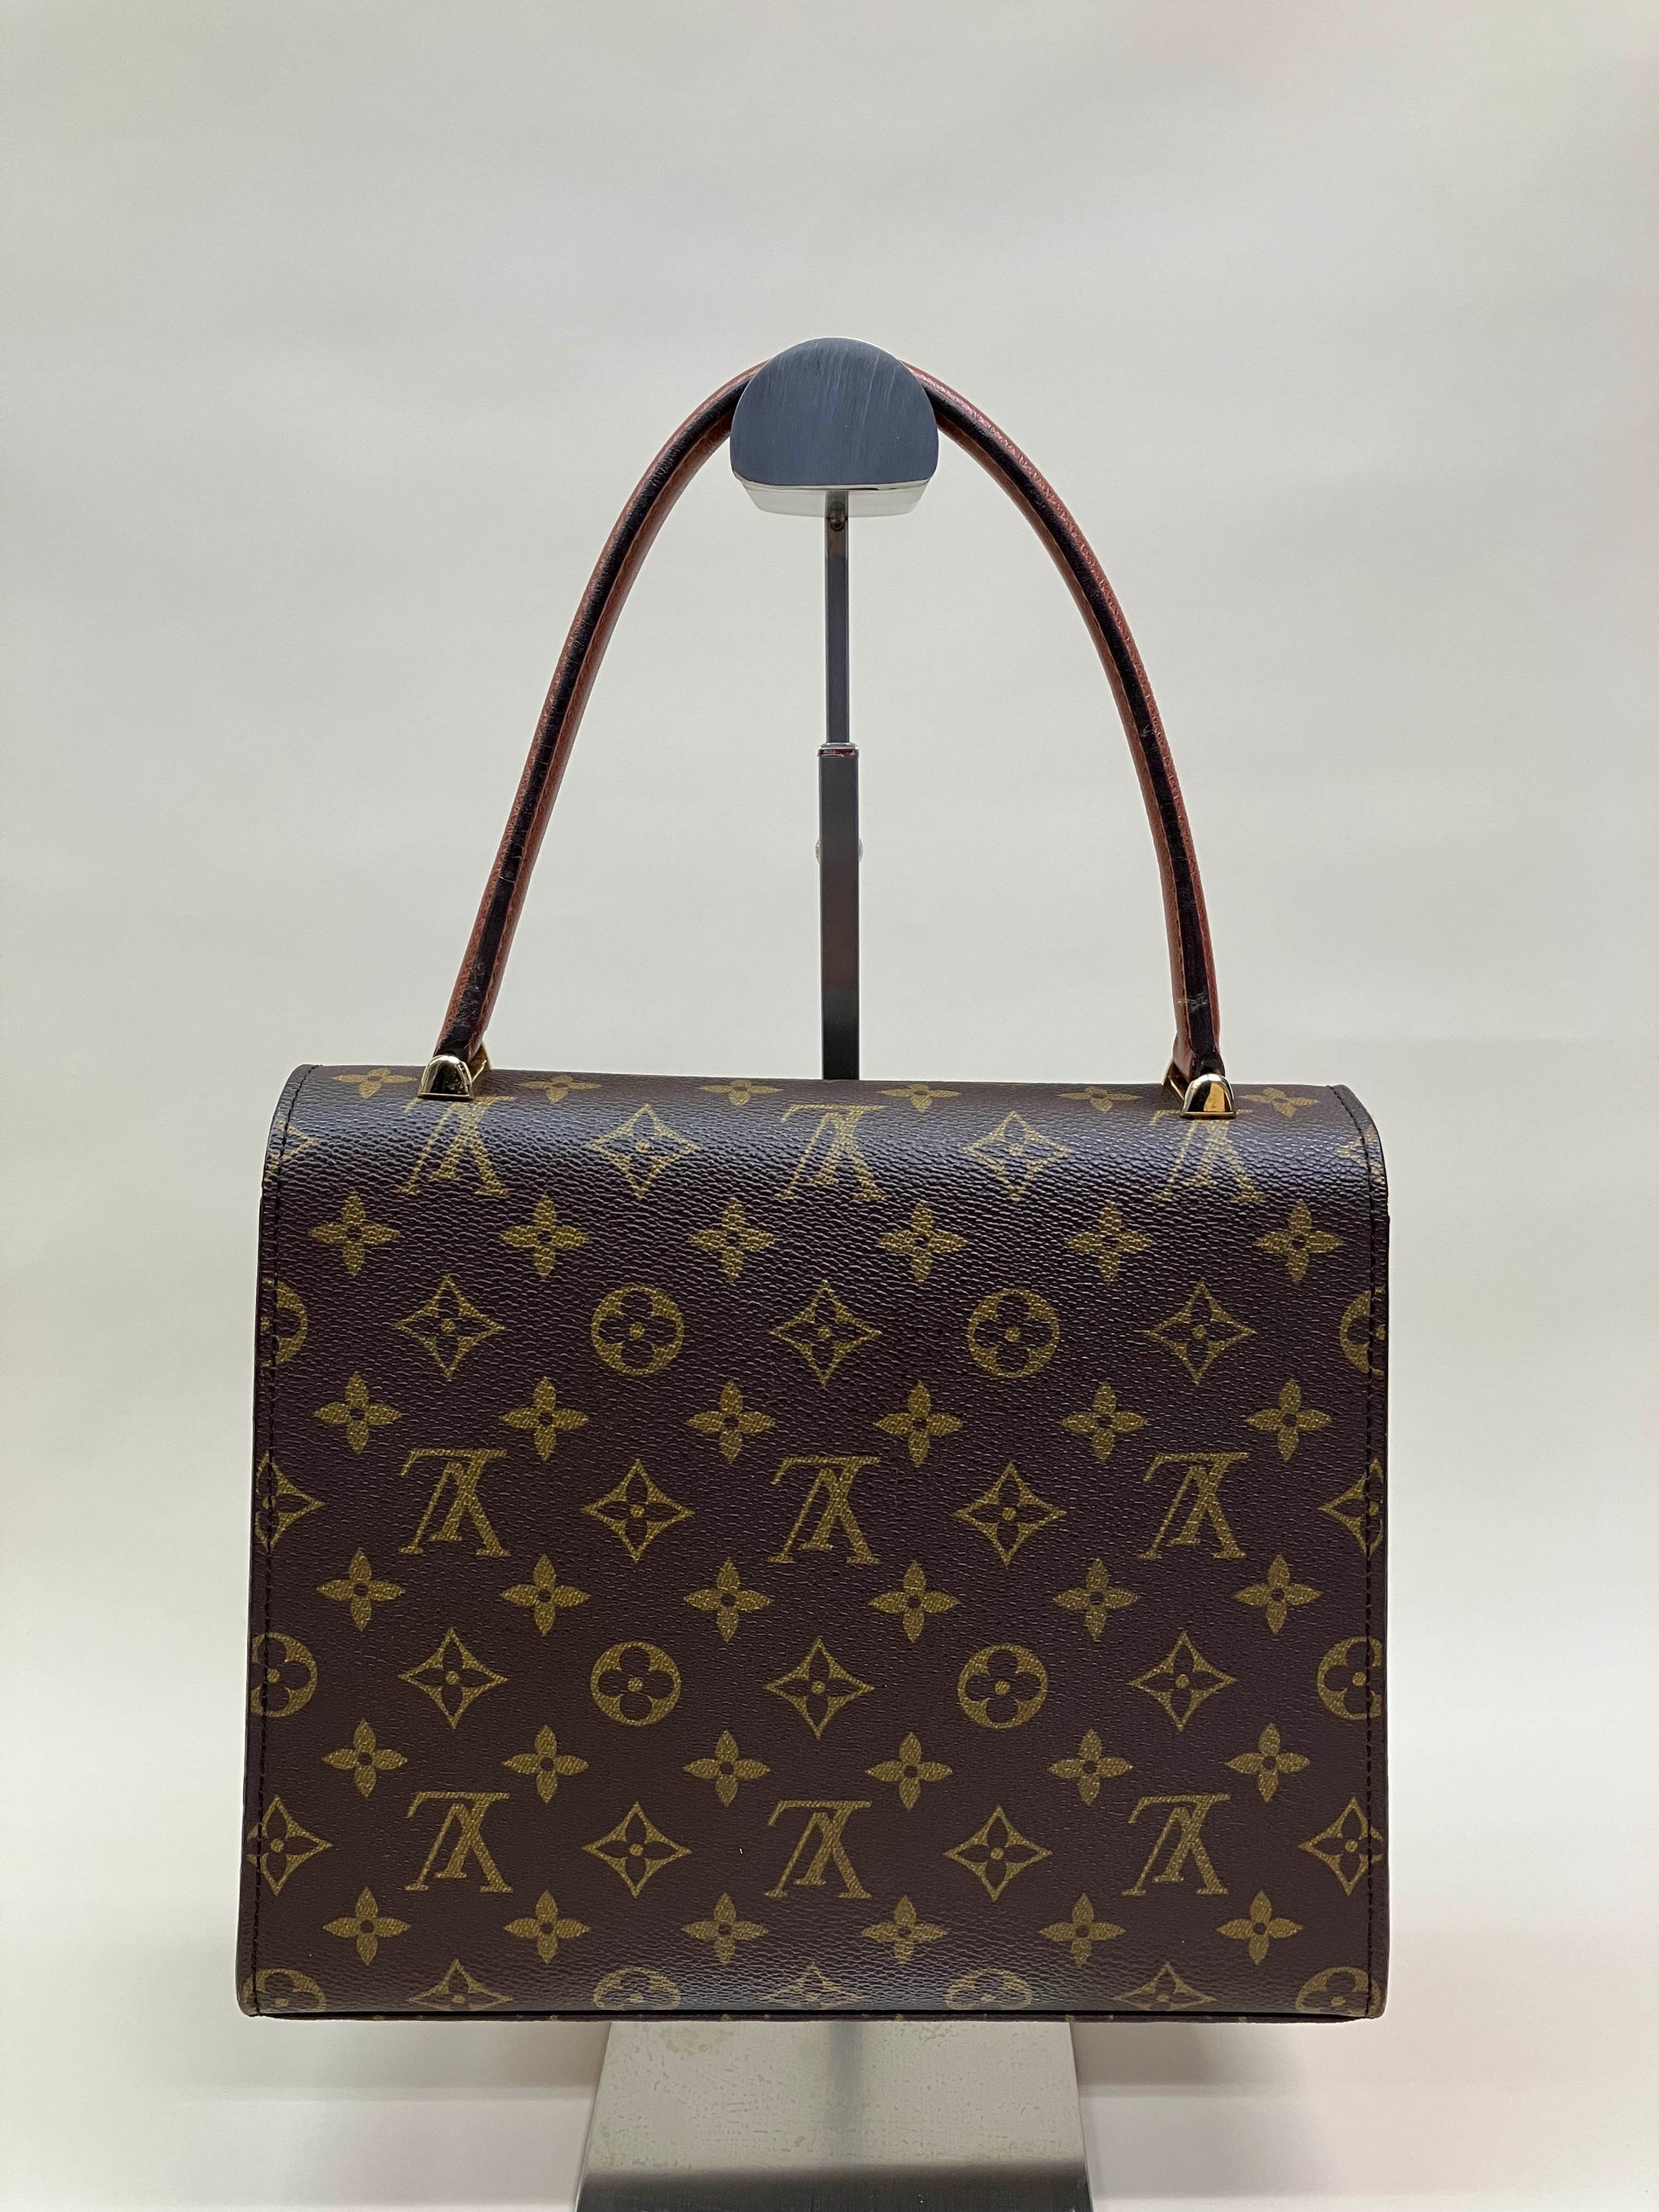 HOW TO TREAT STICKY/DETERIORATING LOUIS VUITTON MONOGRAM CANVAS